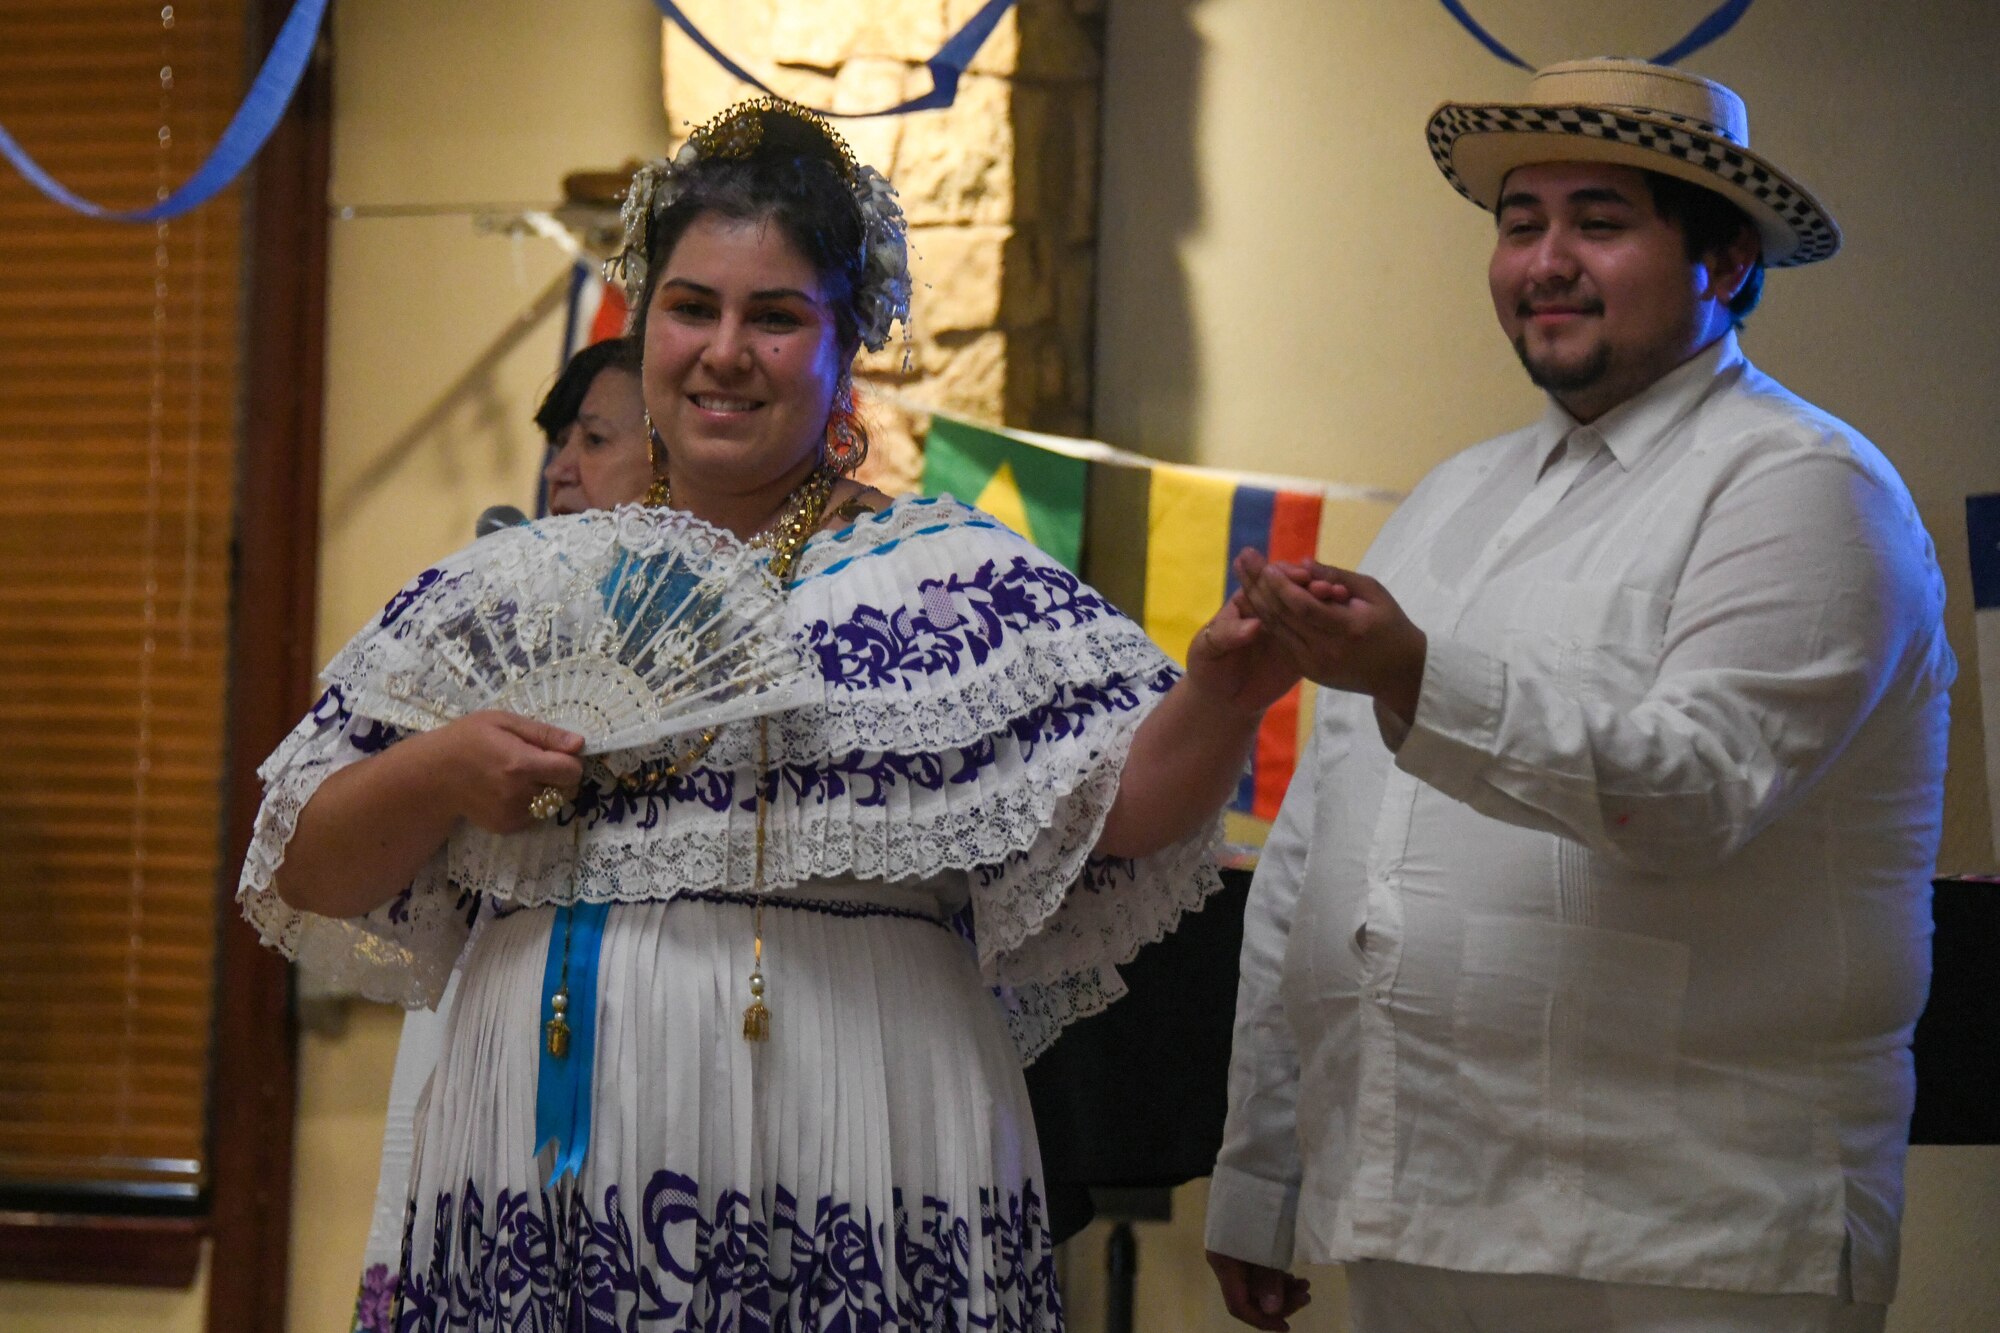 Vanessa Sargent and Alfredo Miguel Martinez, Lawton Mexican Folkloric dancers pose before a dance at a fiesta on Altus Air Force Base, Oklahoma, October 15, 2021. The fiesta was an opportunity for Airmen and family members to enjoy traditional Latin dishes, as well as learn more about Latin culture through dance. (U.S. Air Force photo by Airman 1st Class Trenton Jancze)